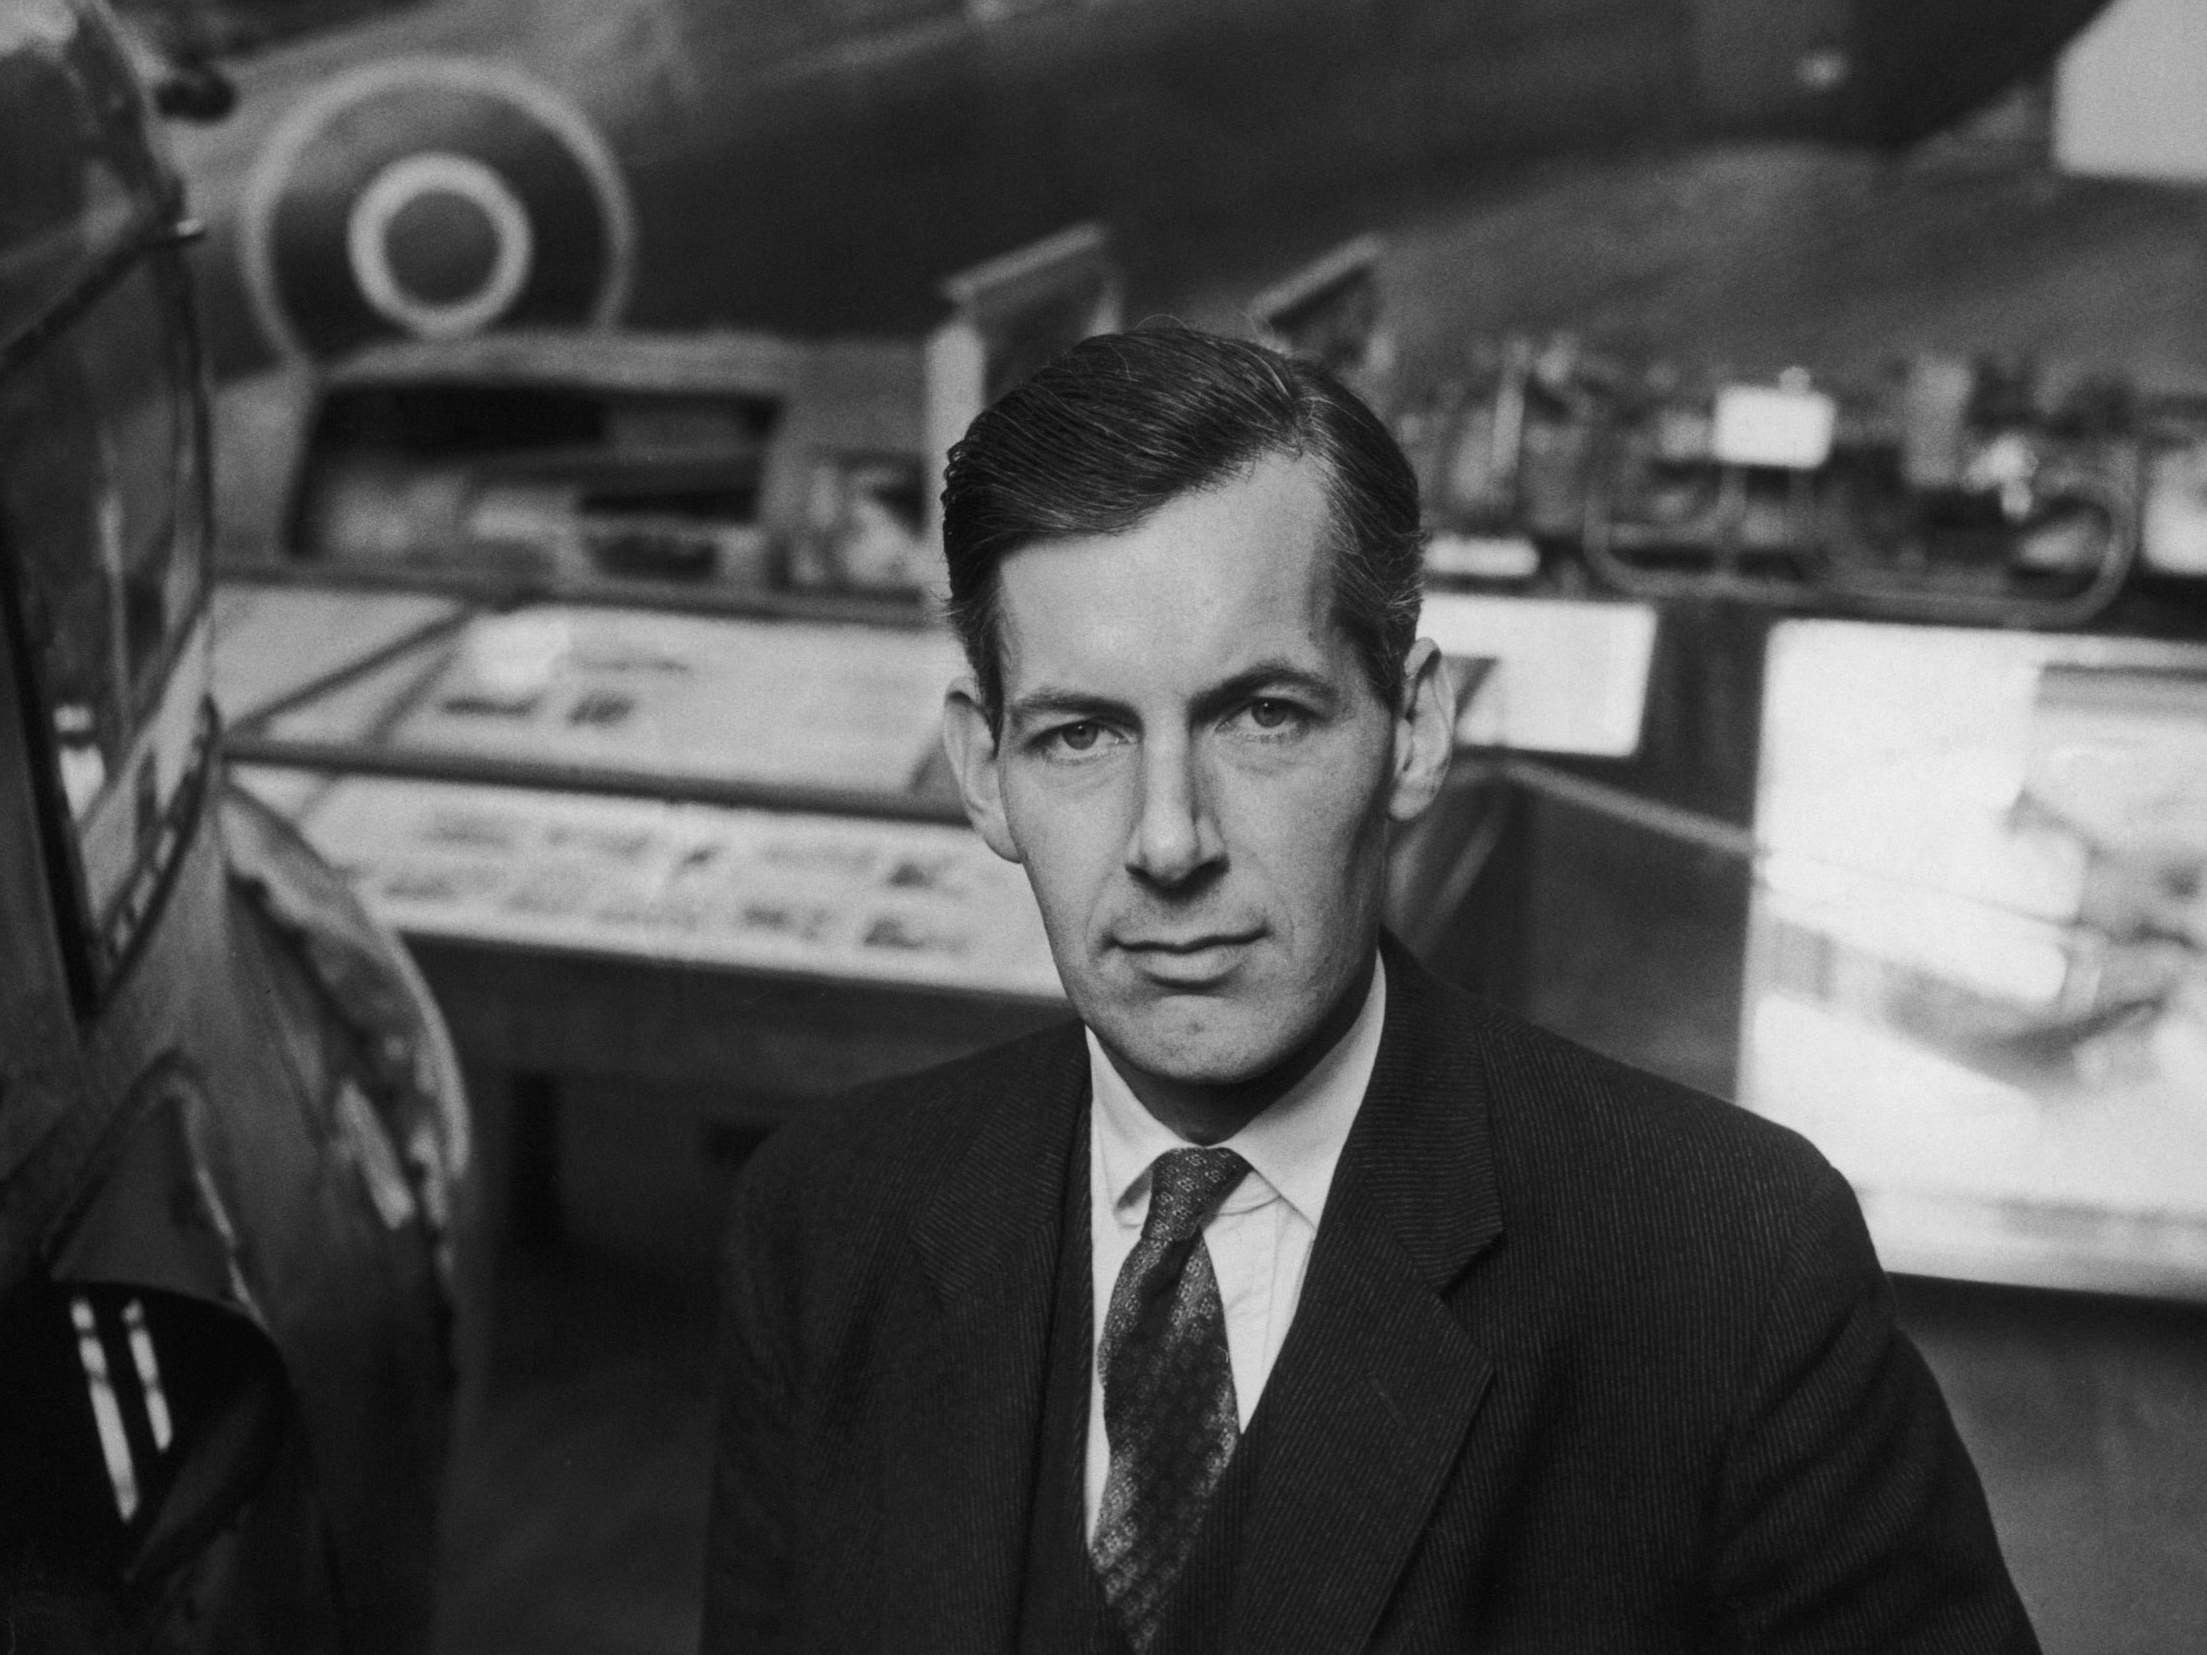 Frankland with some of the aircraft on display at the Imperial War Museum in 1961